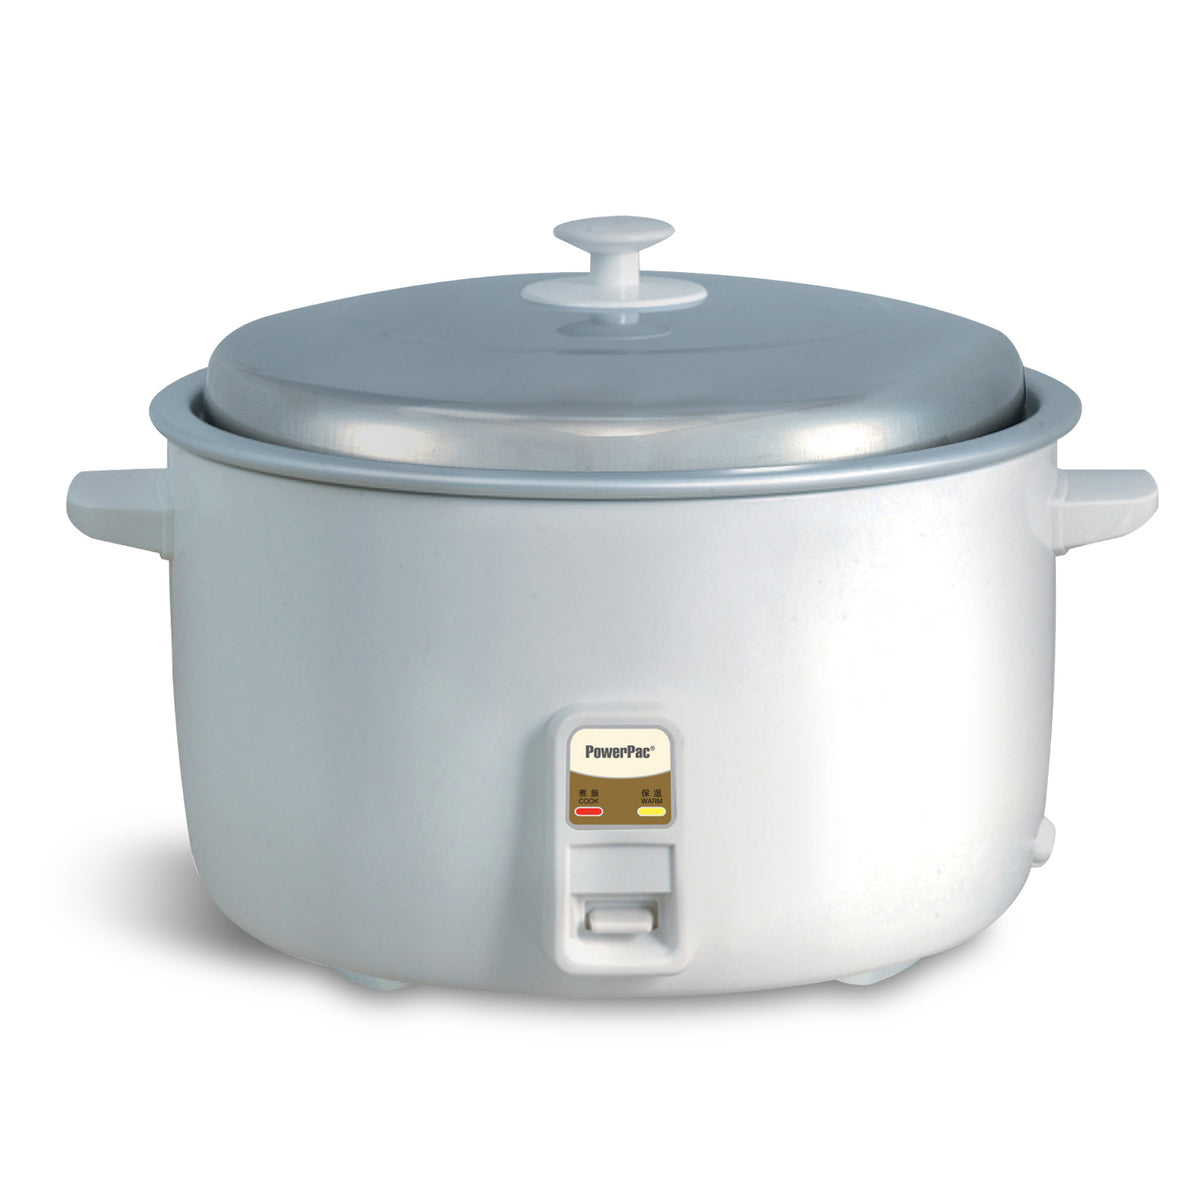 3.6L Rice Cooker with Aluminium Lid (PPRC16) - PowerPacSG